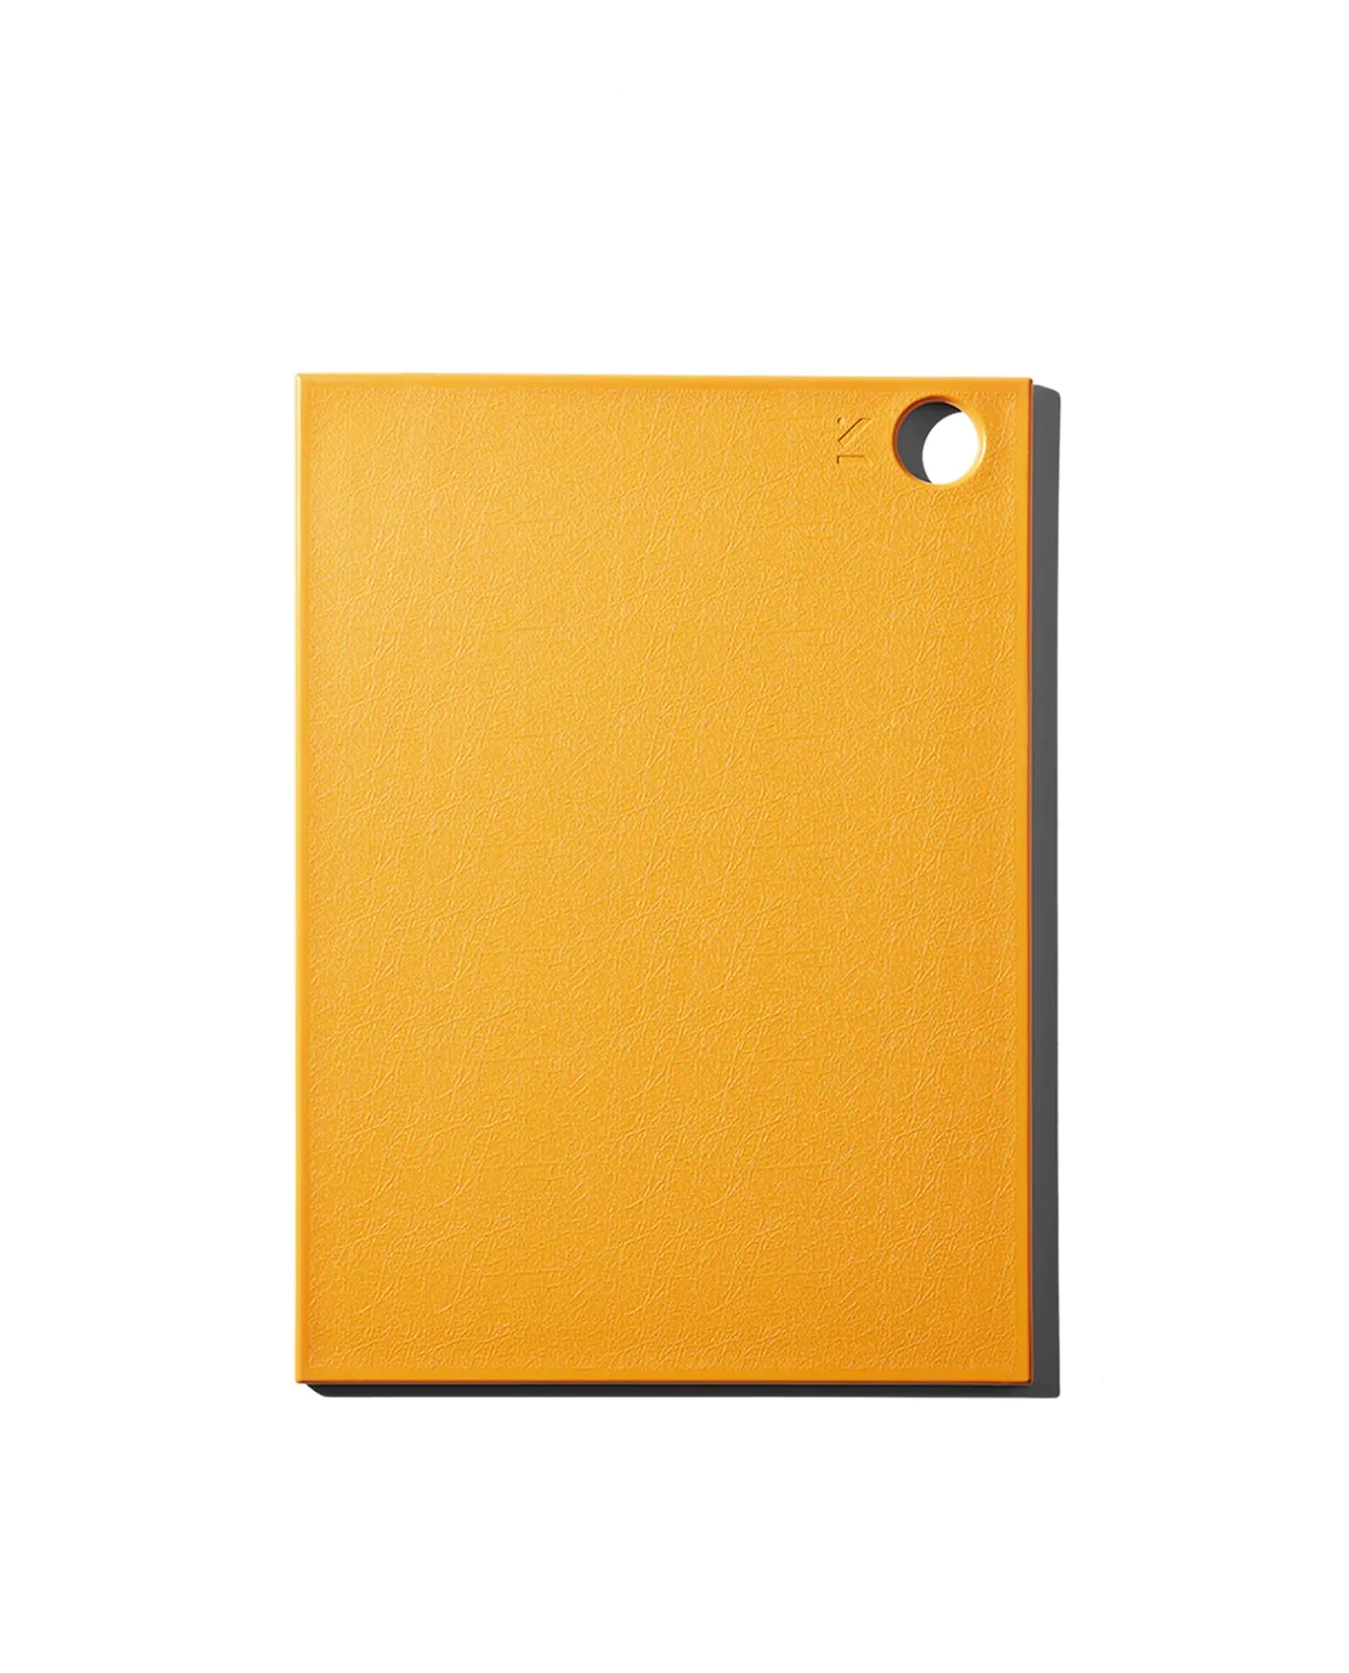 A yellow-orange cutting board with a hole (to hang it up if need be) in the corner is shown lying flat.